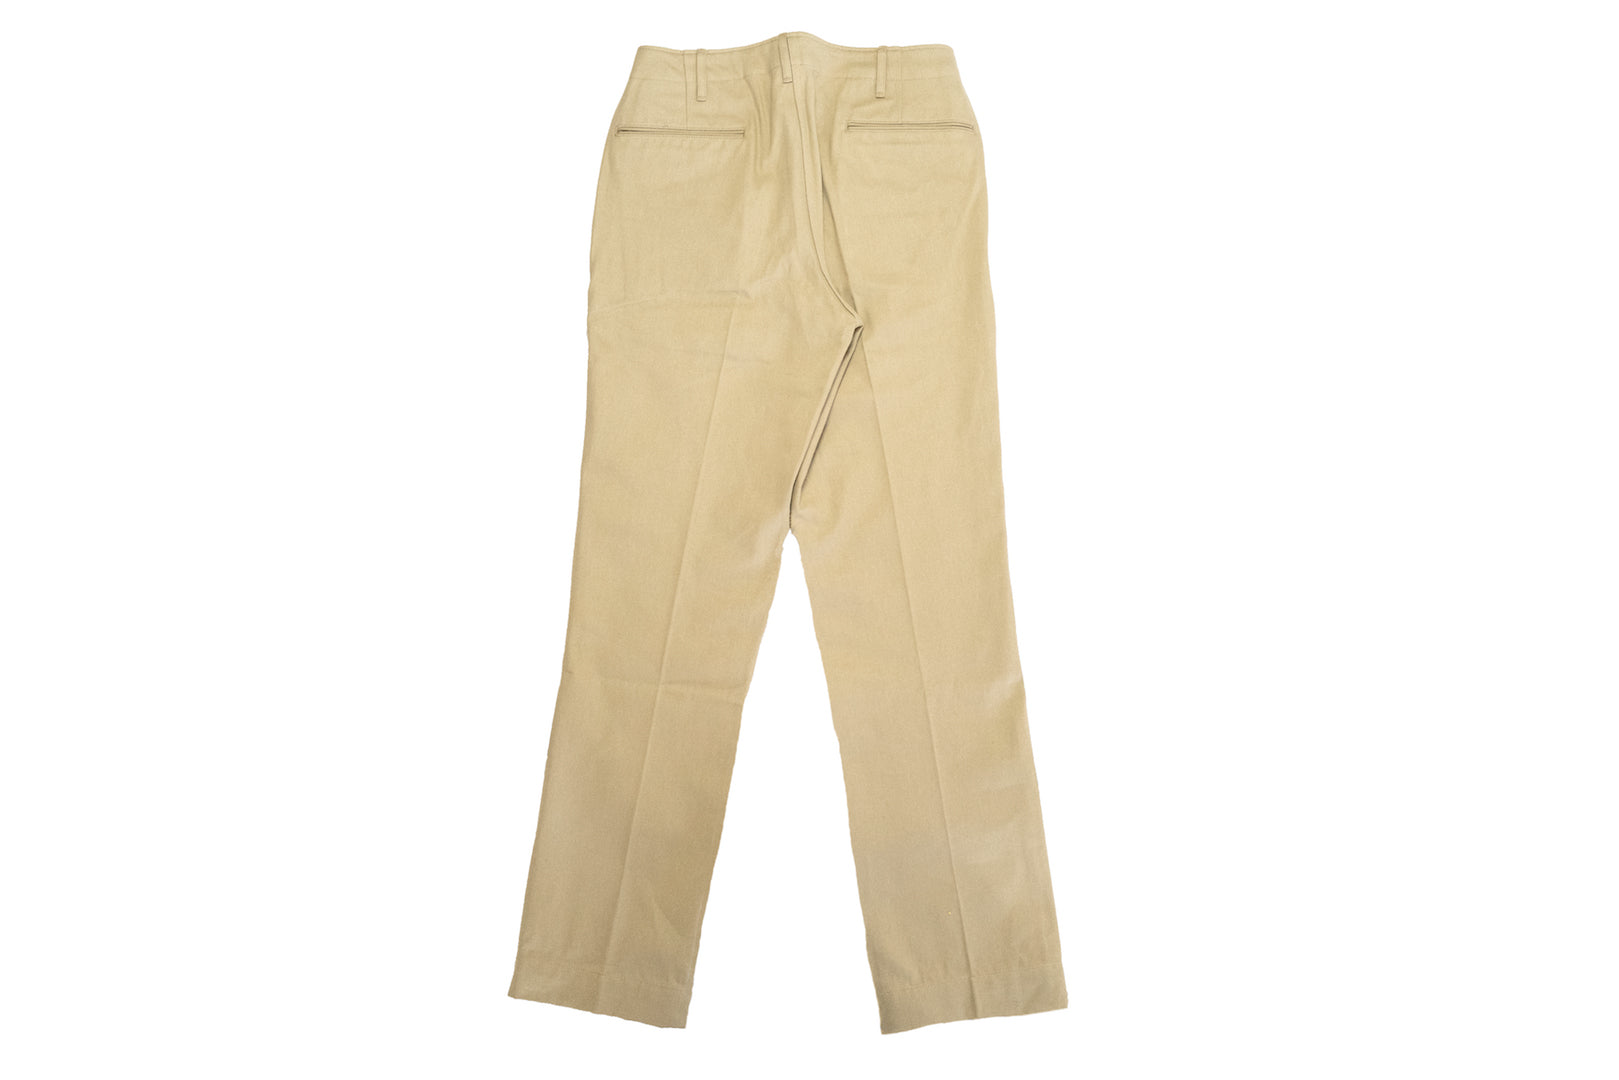 Boncoura 14oz Selvage Duck '41 Cotton Chinos (Relax Tapered Fit)